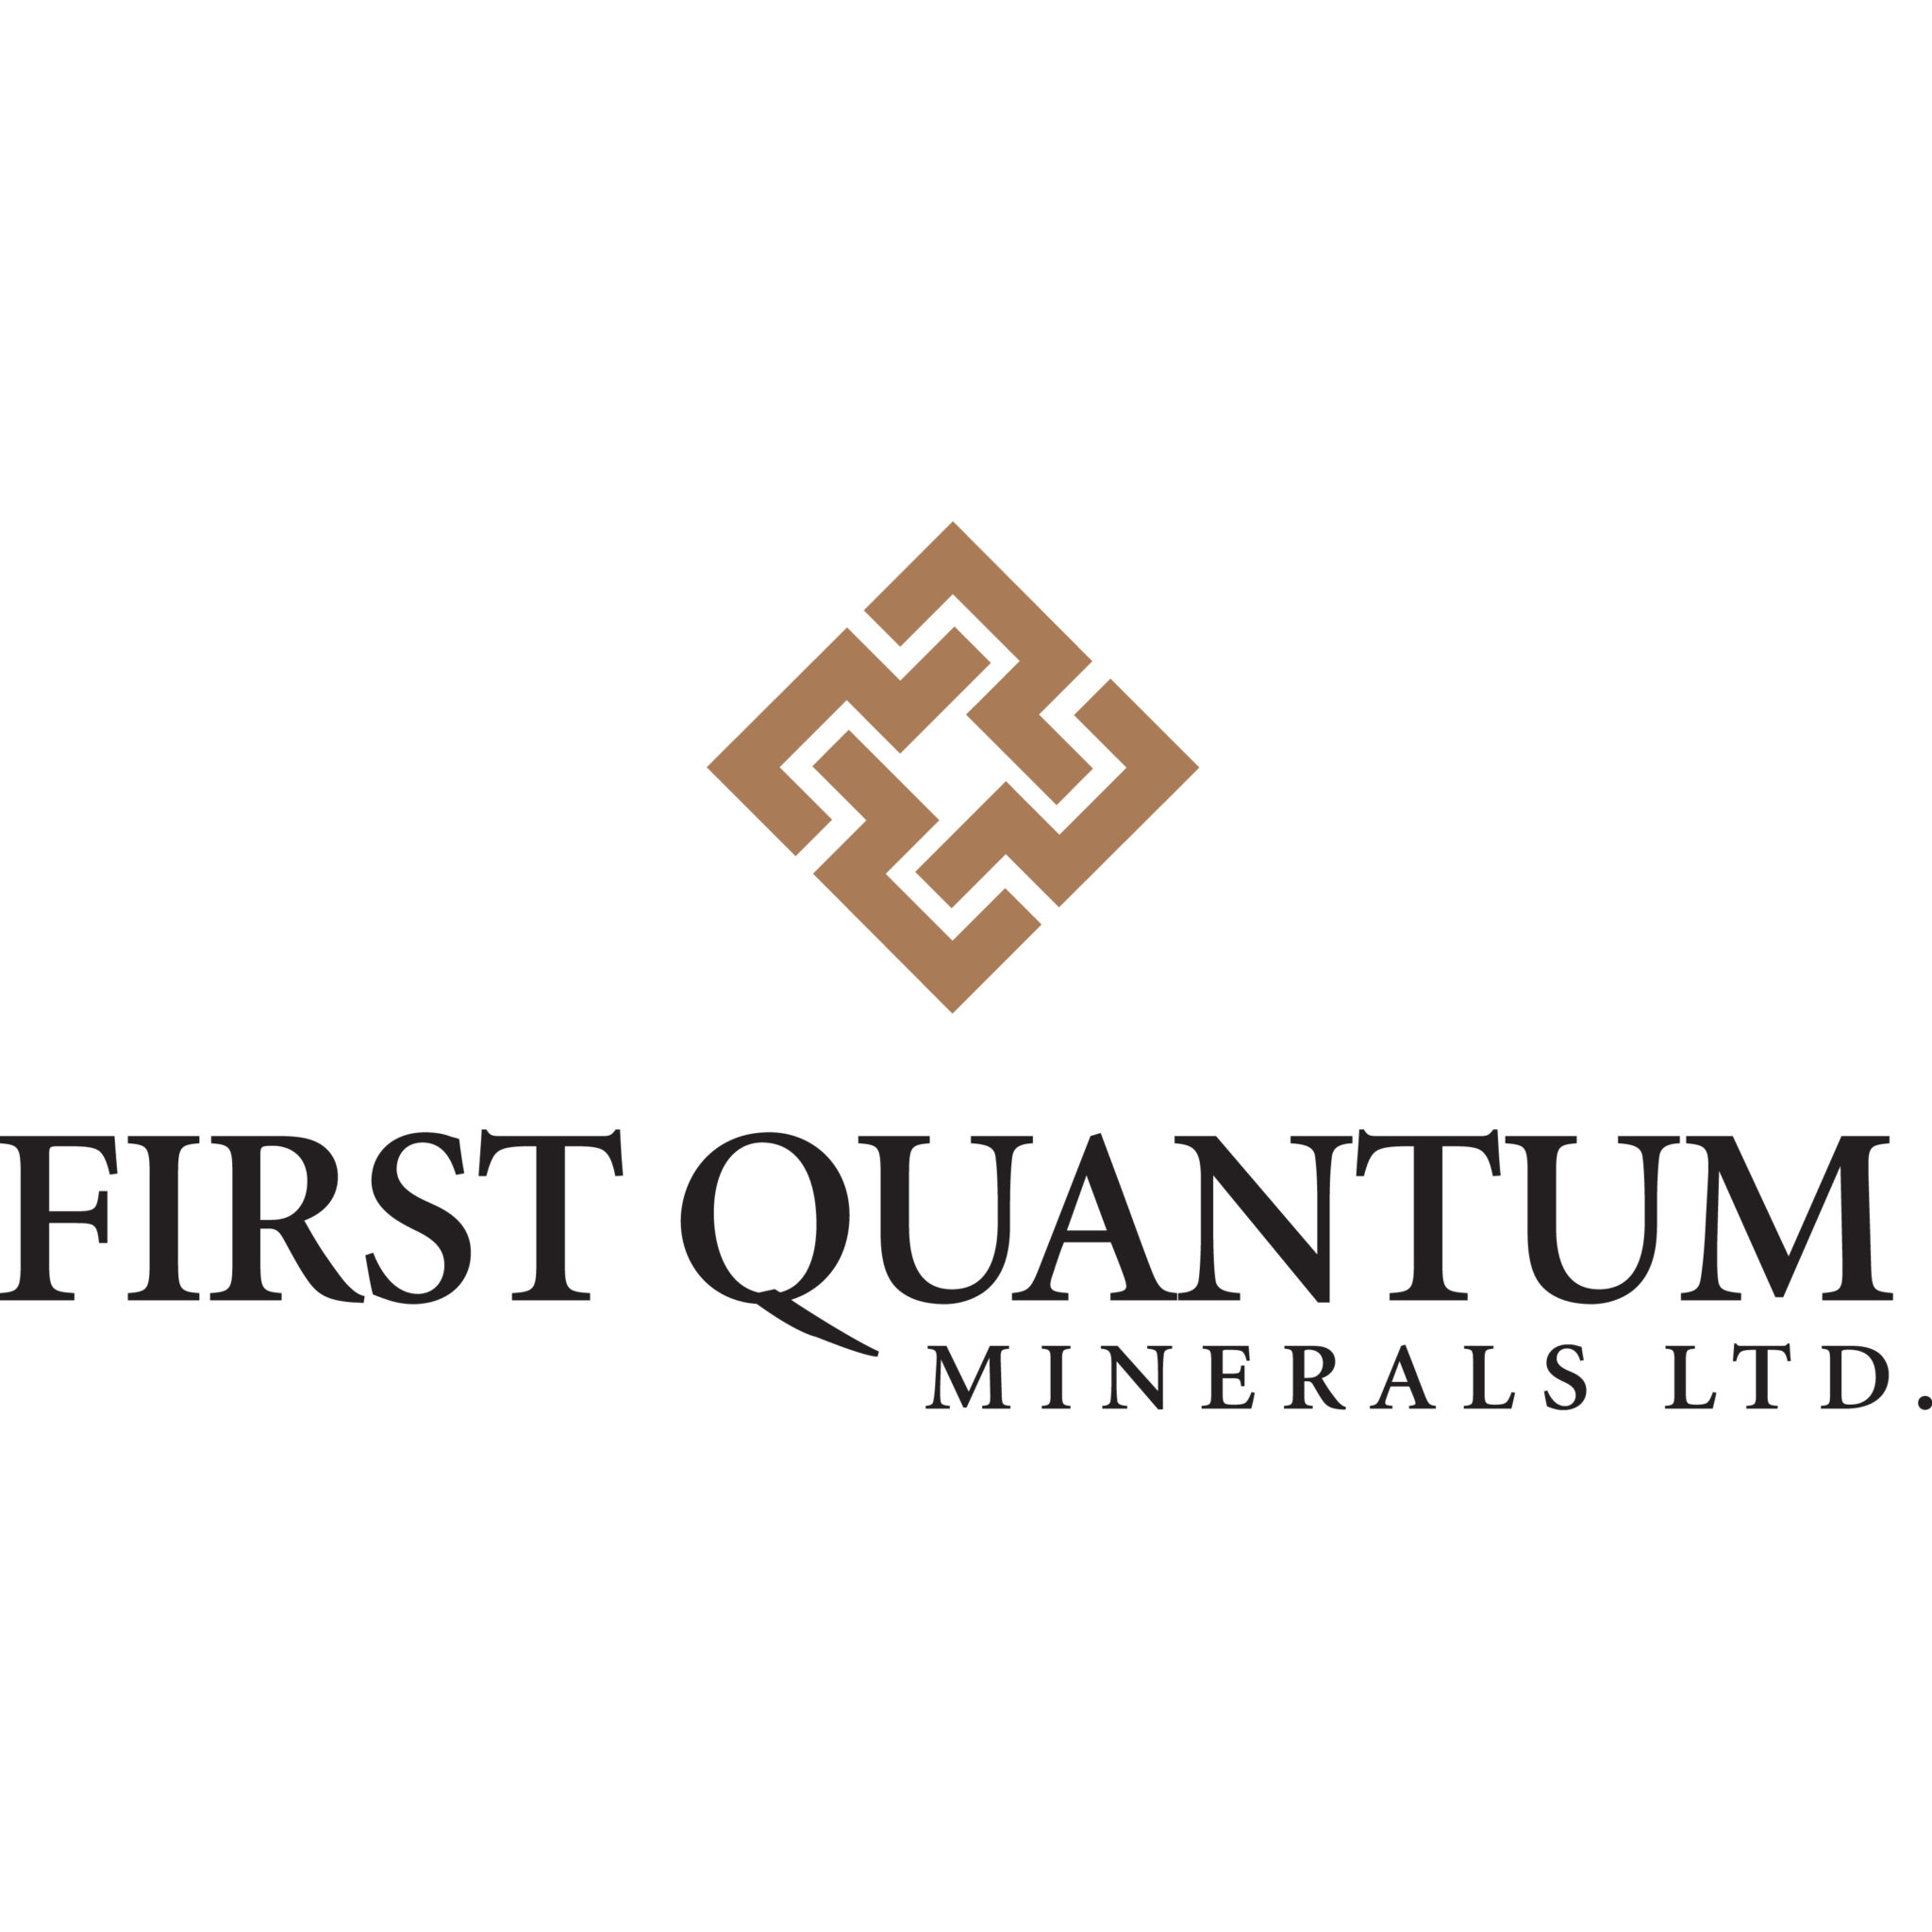 First Quantum Minerals approves $1.25 bln mine expansion in Zambia